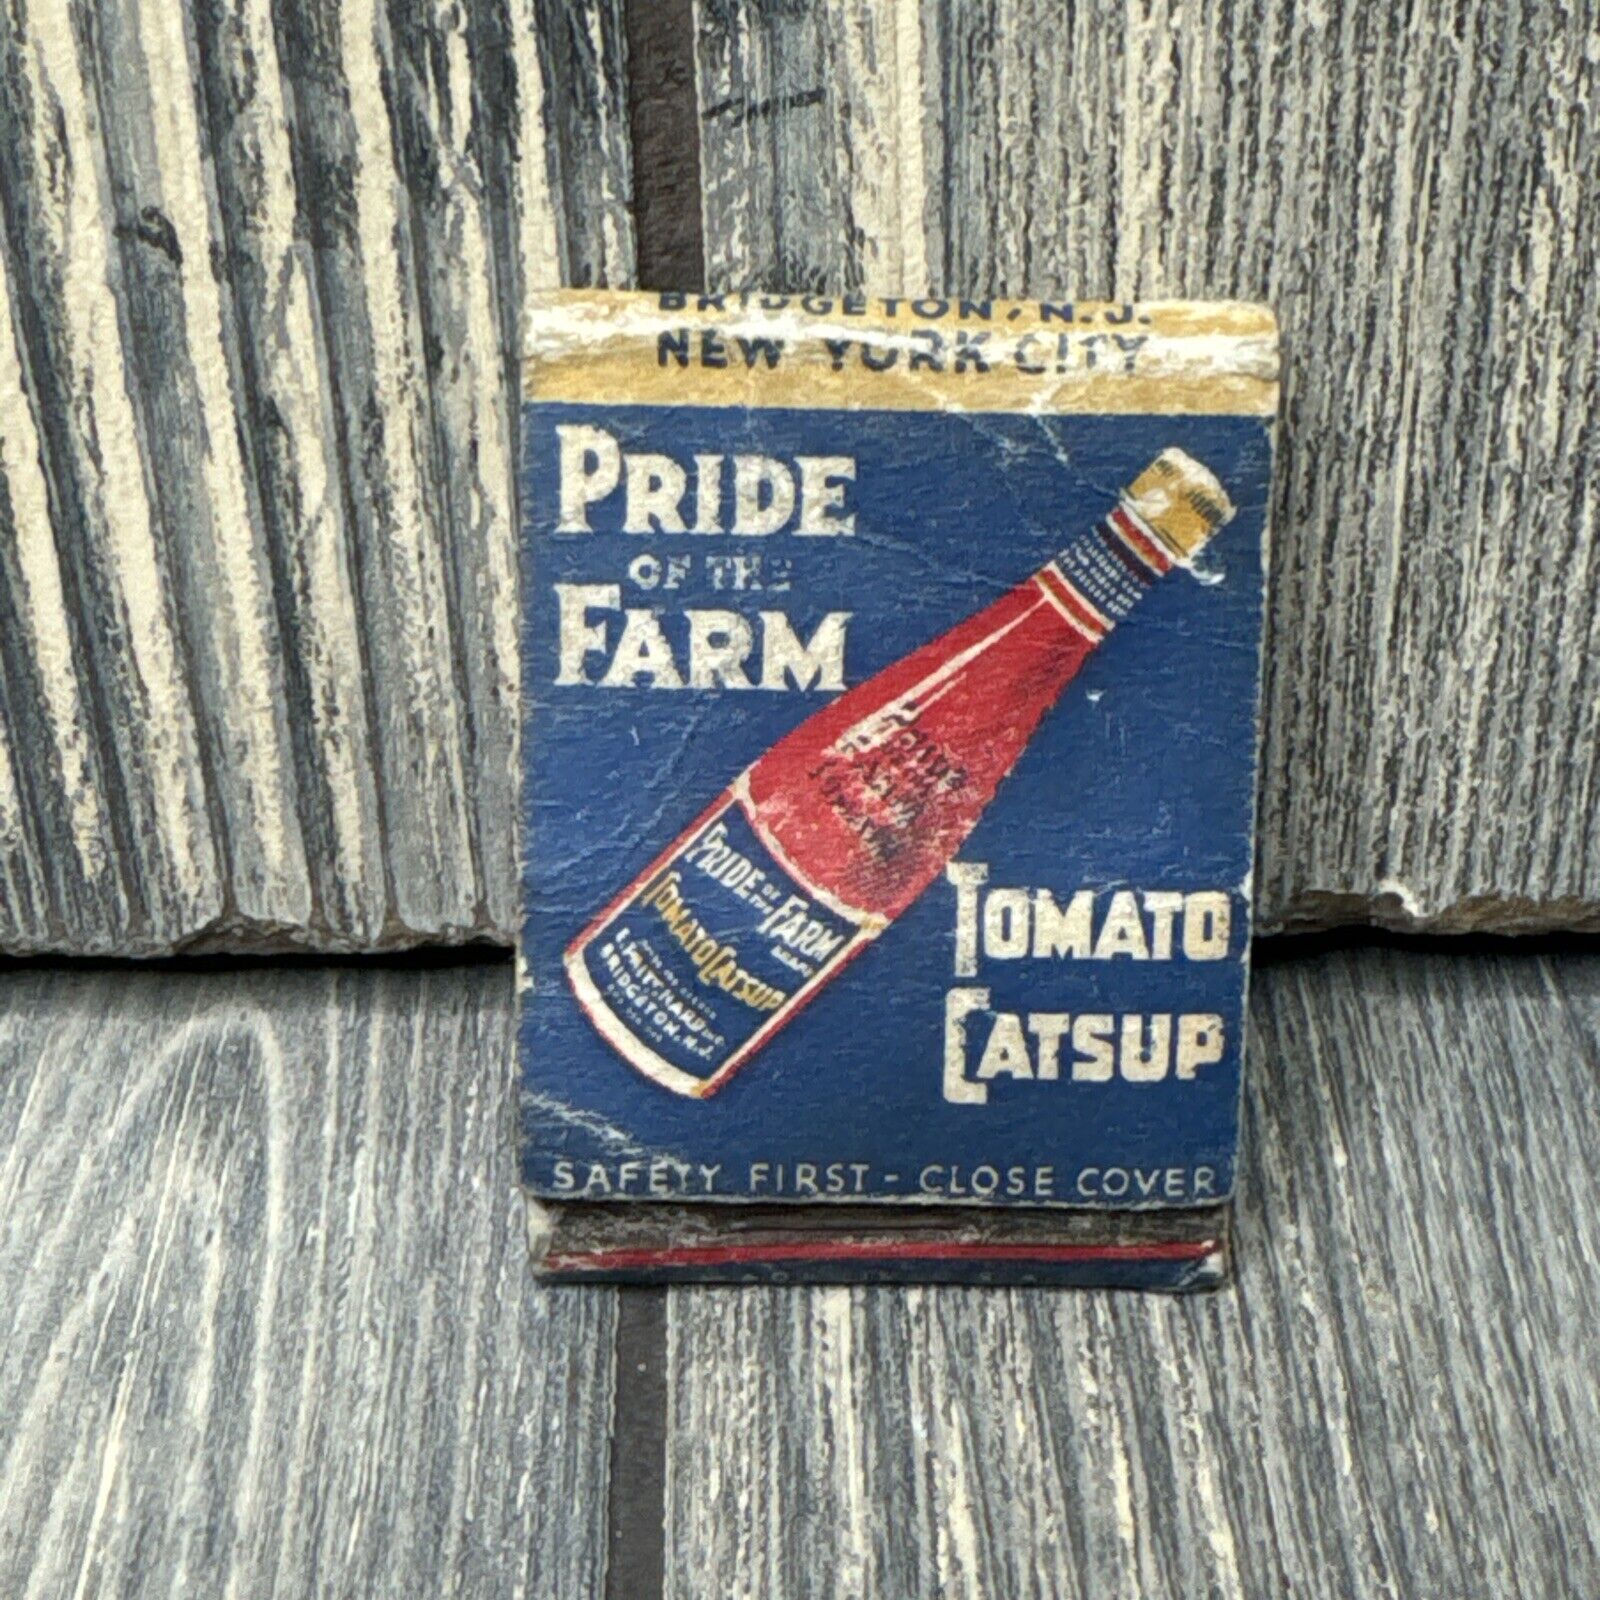  Vintage Pride of the Farm Tomato Catsup Matchbook Advertisement